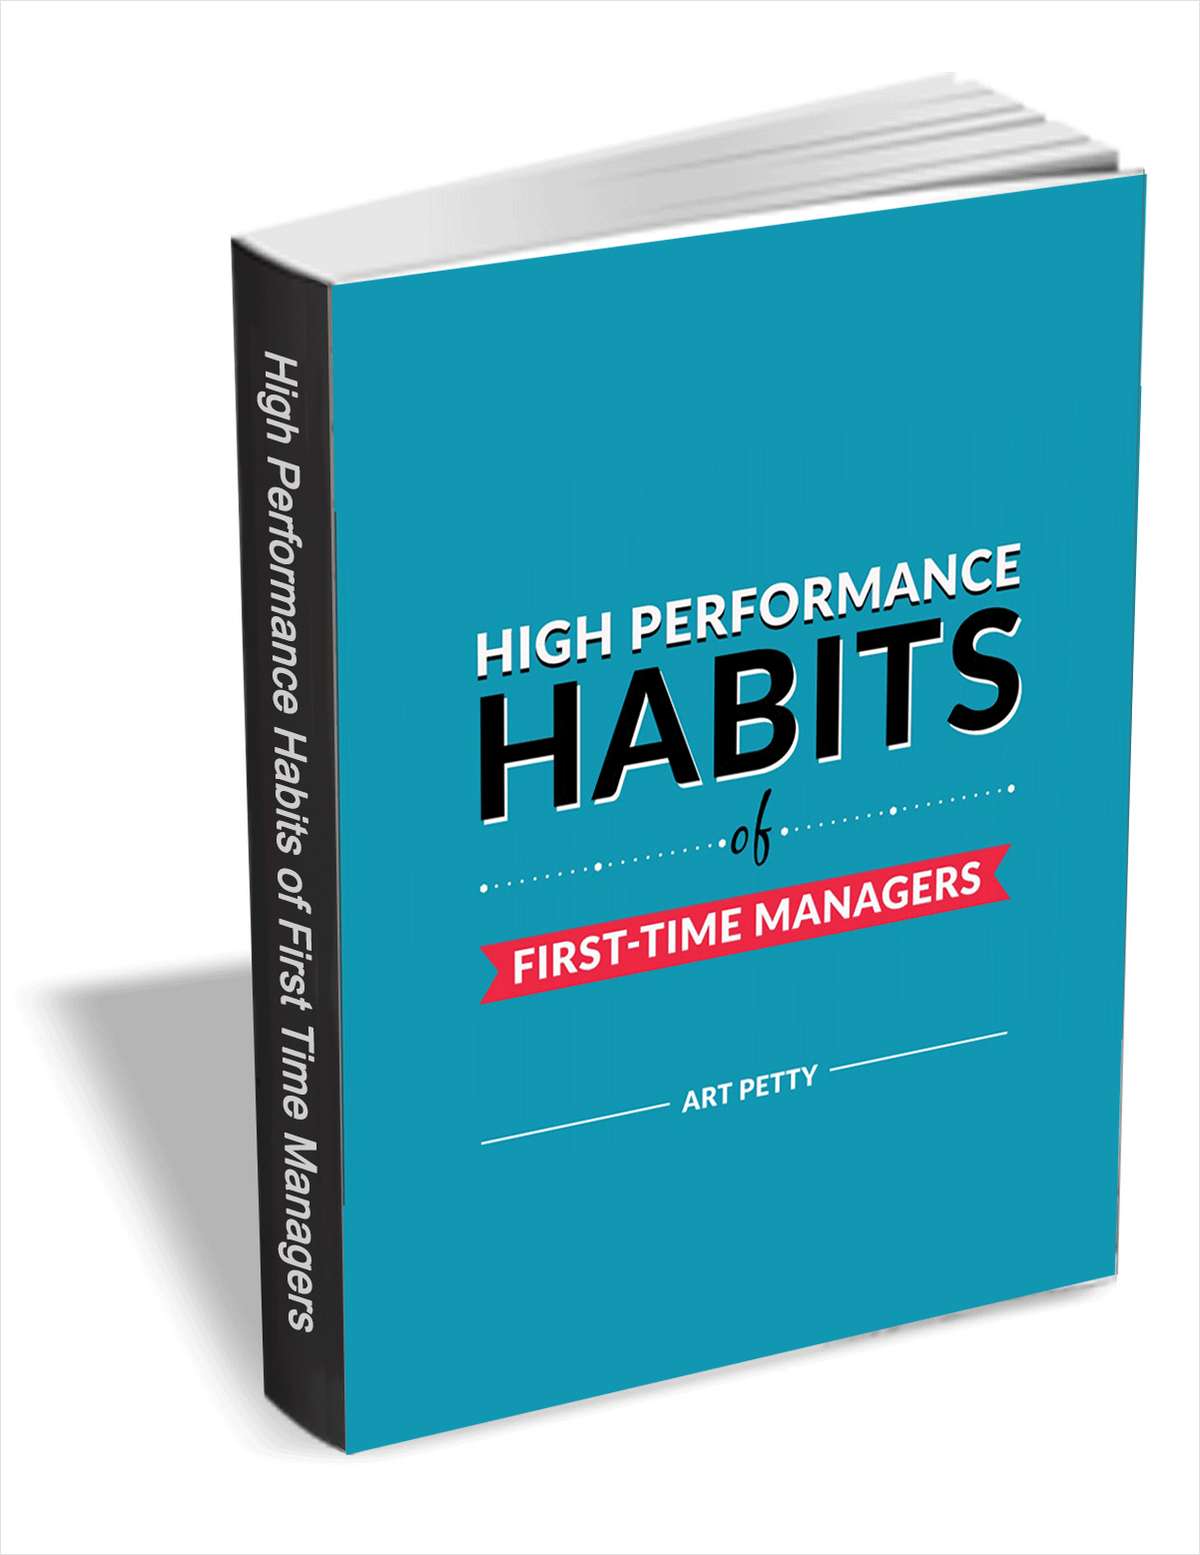 High Performance Habits of First-Time Managers